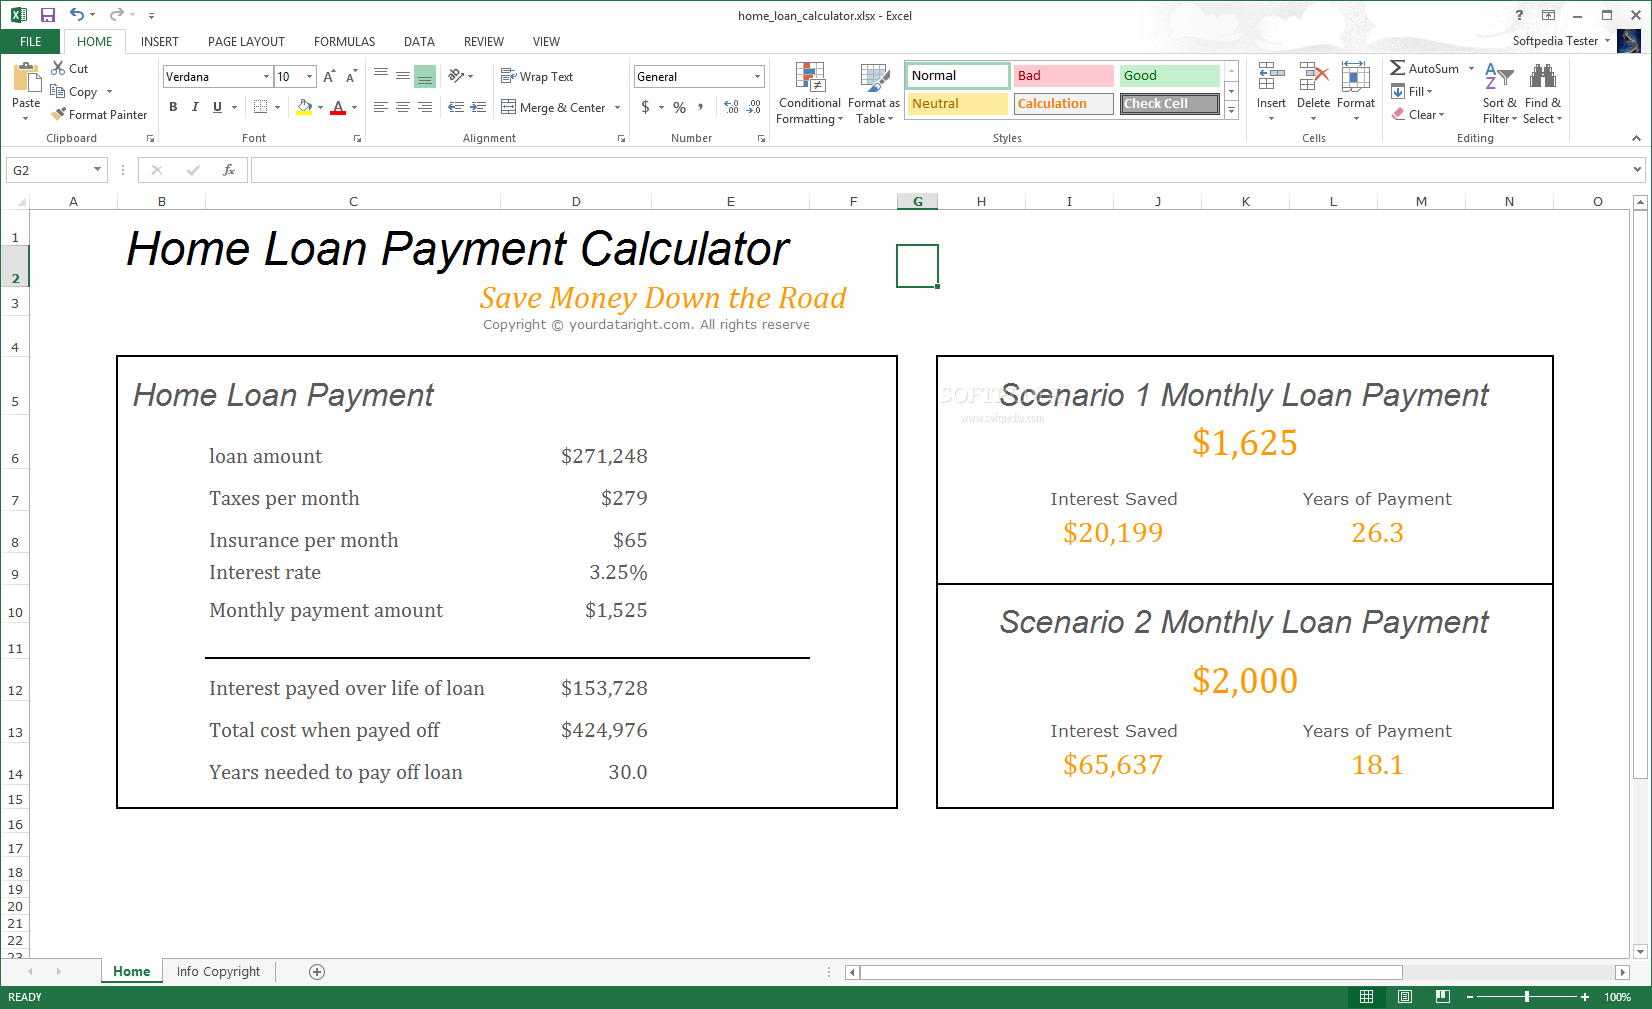 Home Loan Payment Calculator